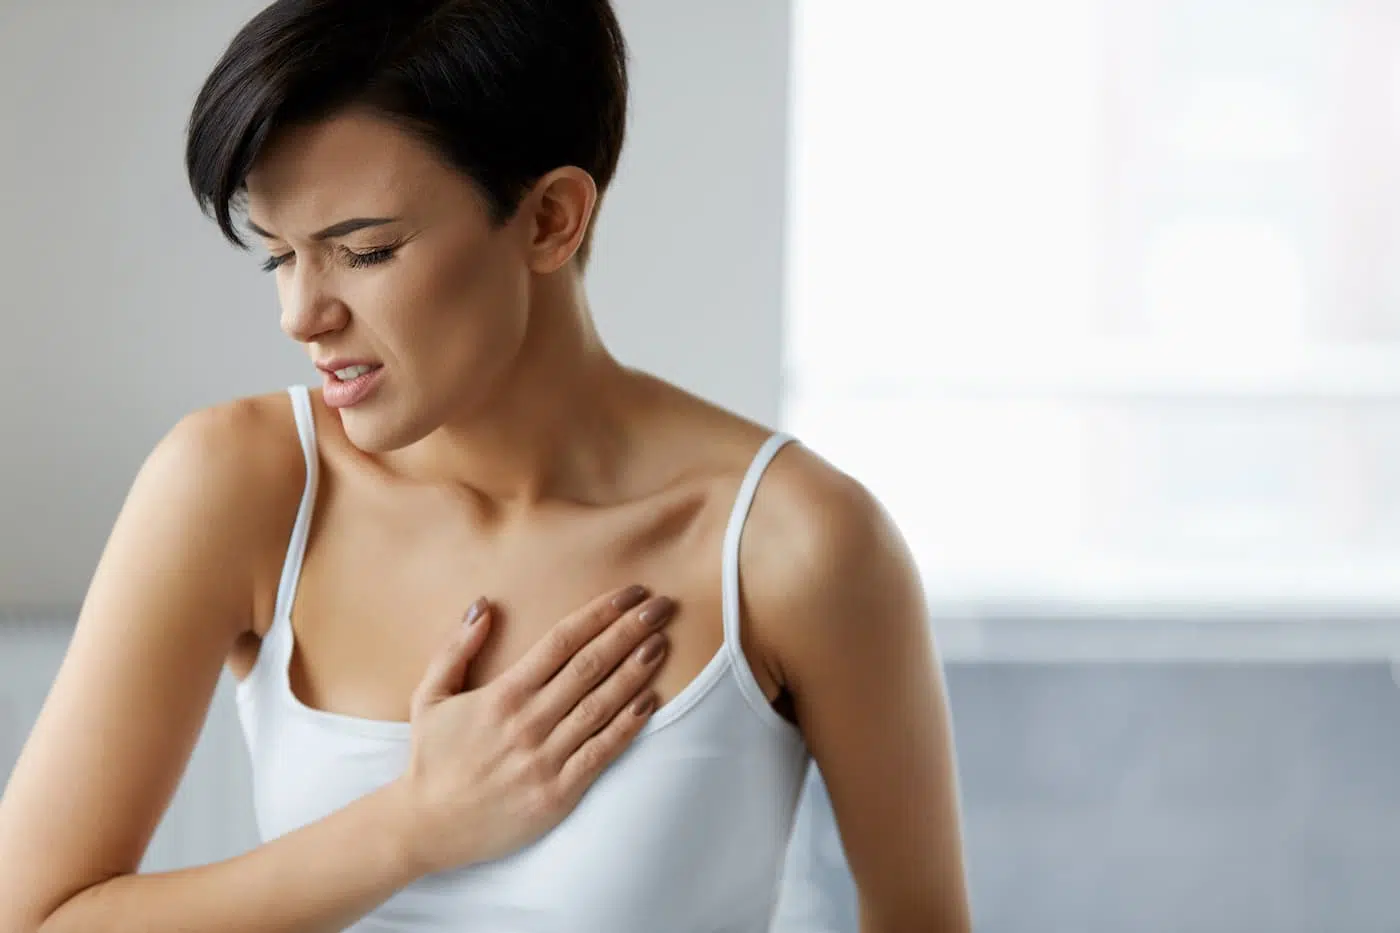 Woman feeling pain in chest. Health care